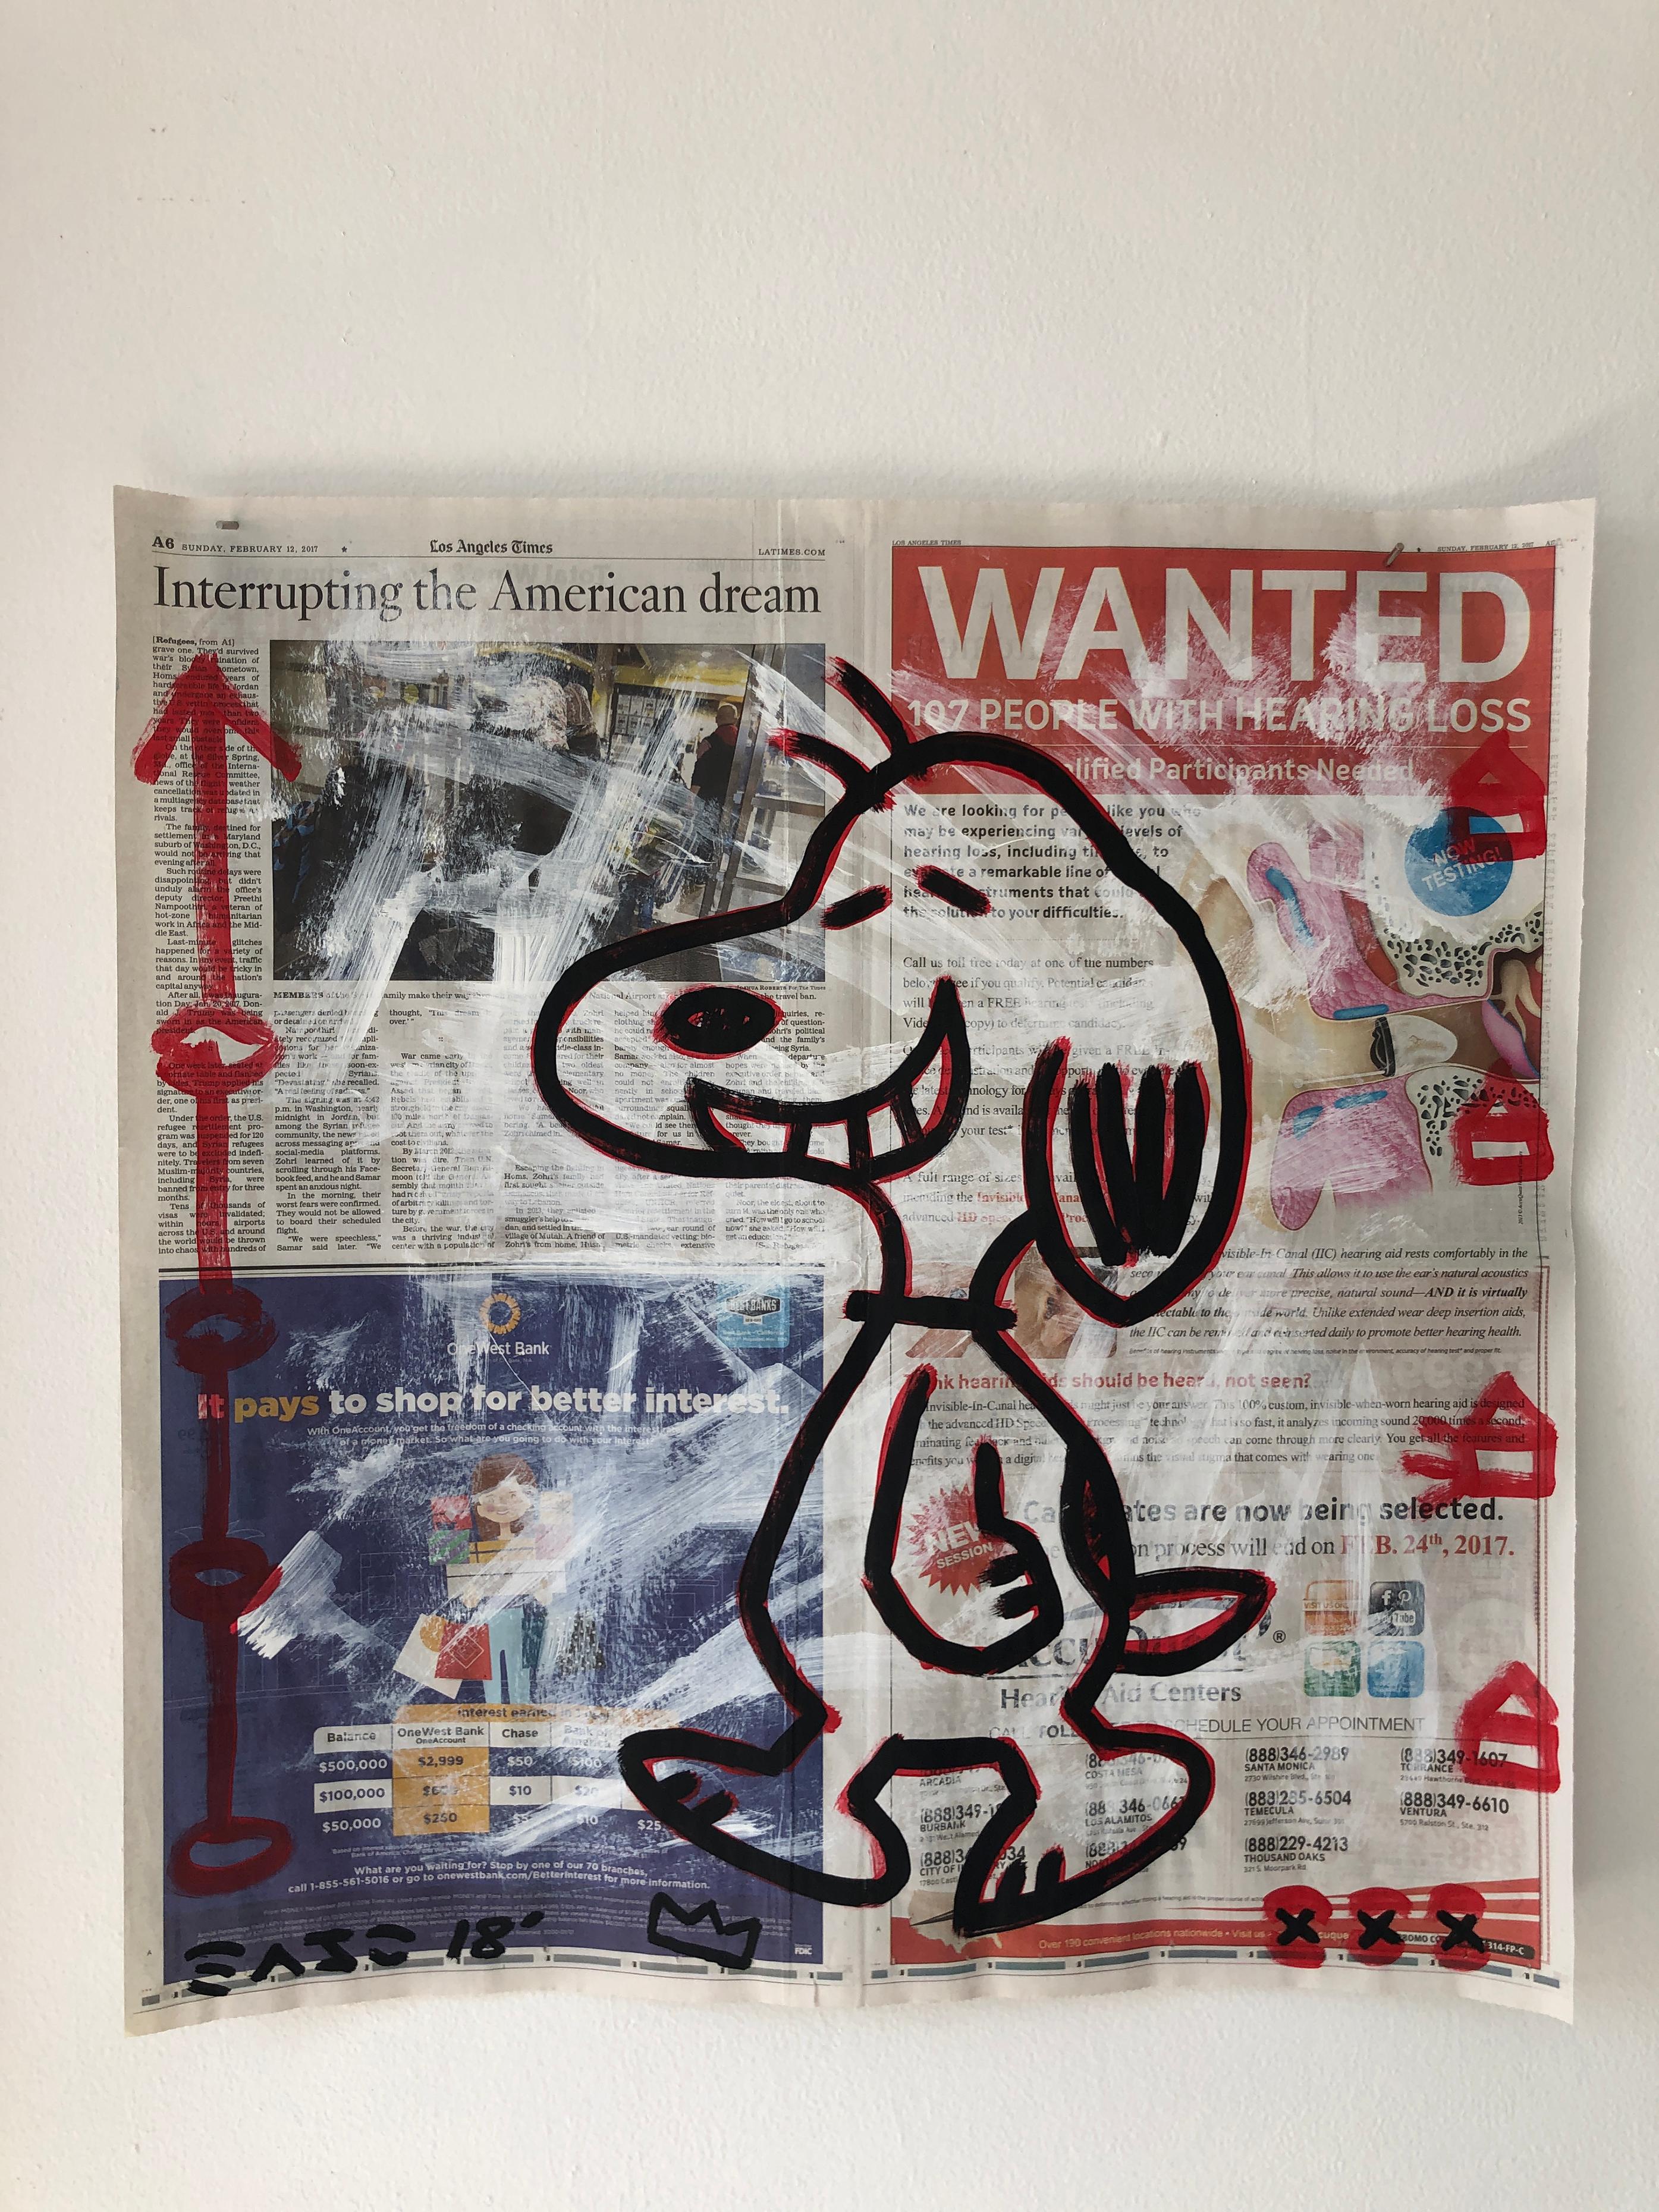 "Snoopy" Acrylic and Collage on LA Times newsprint